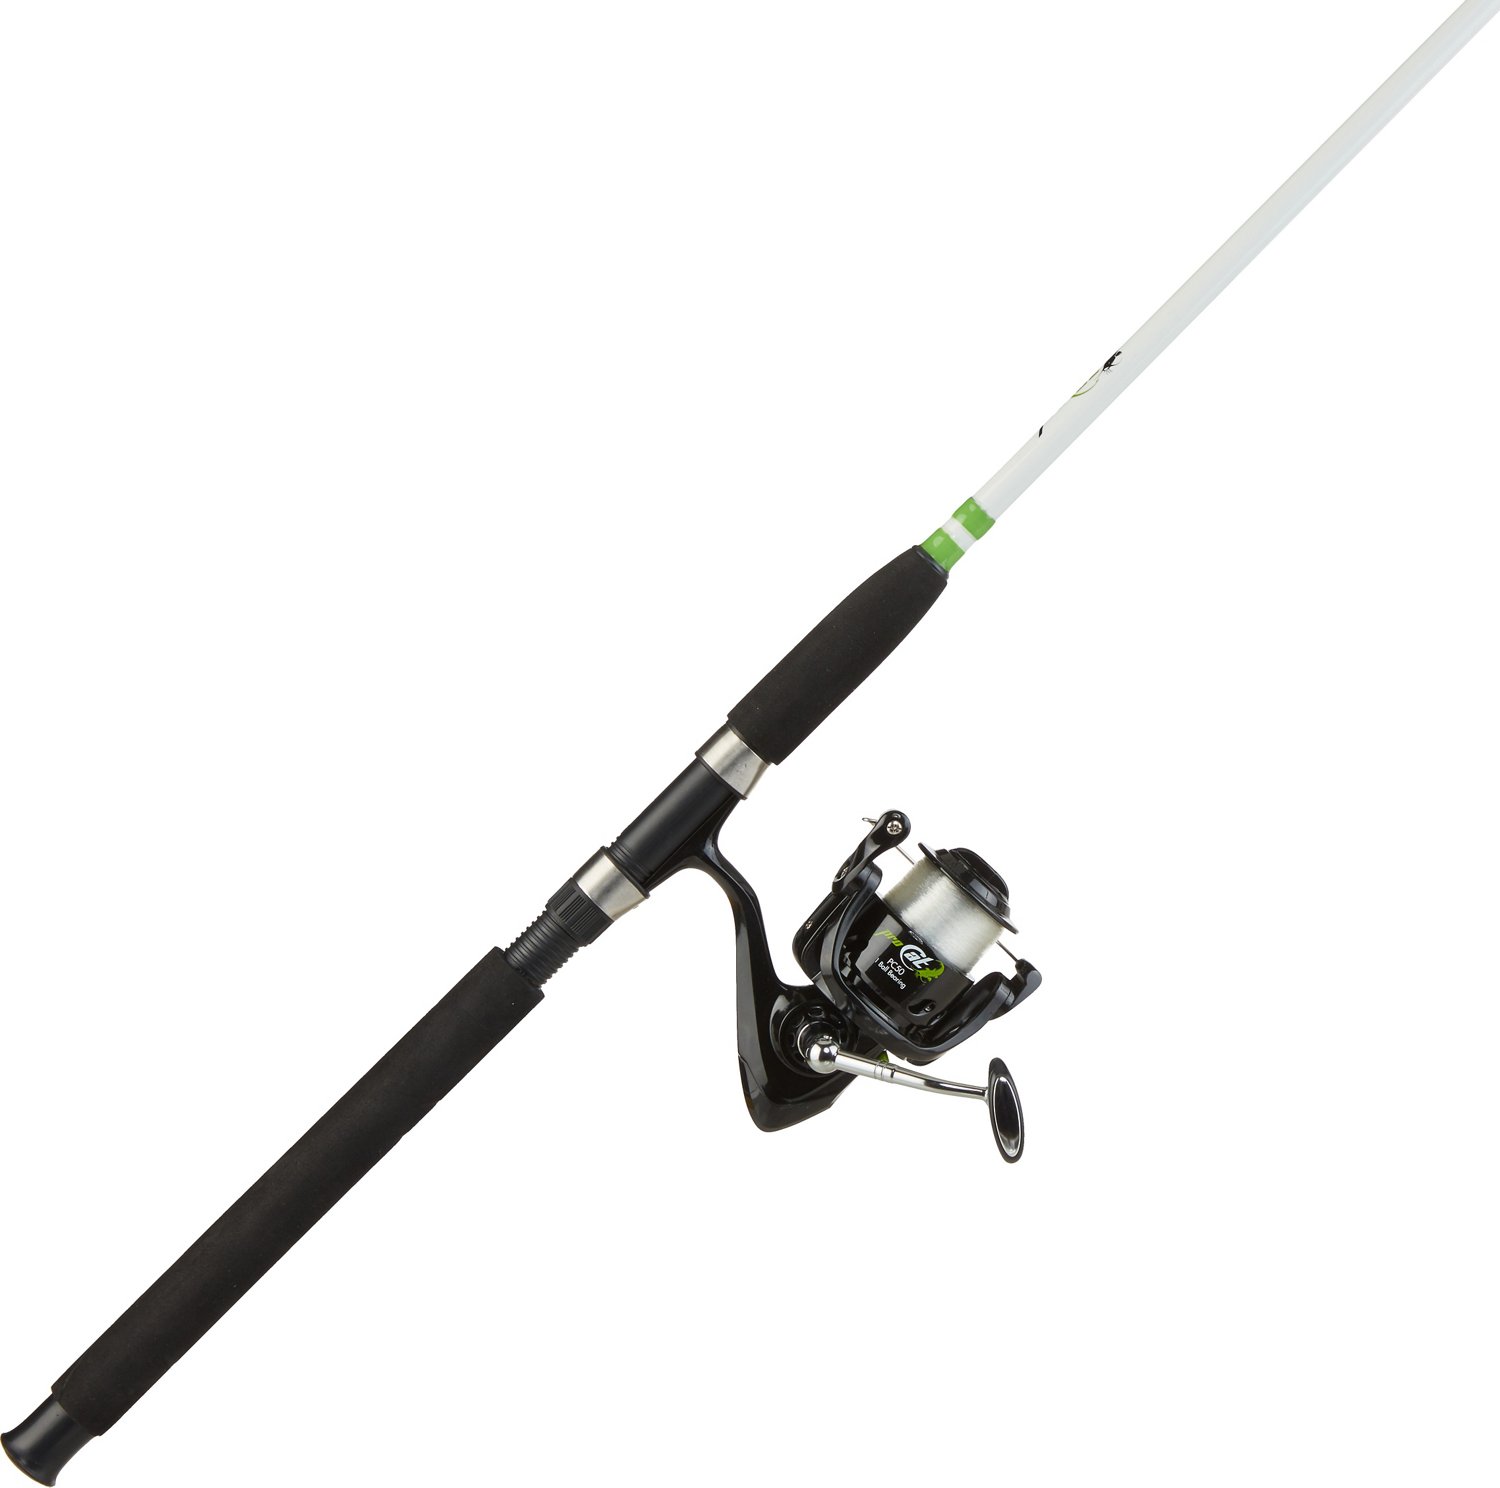 ZURYP Portable Catfish Rod Combo 1.8/2.4M Casting Rods For Spinning And  Fishing, Includes Bag Travel Reeling Kit 230609 From Ren05, $27.48